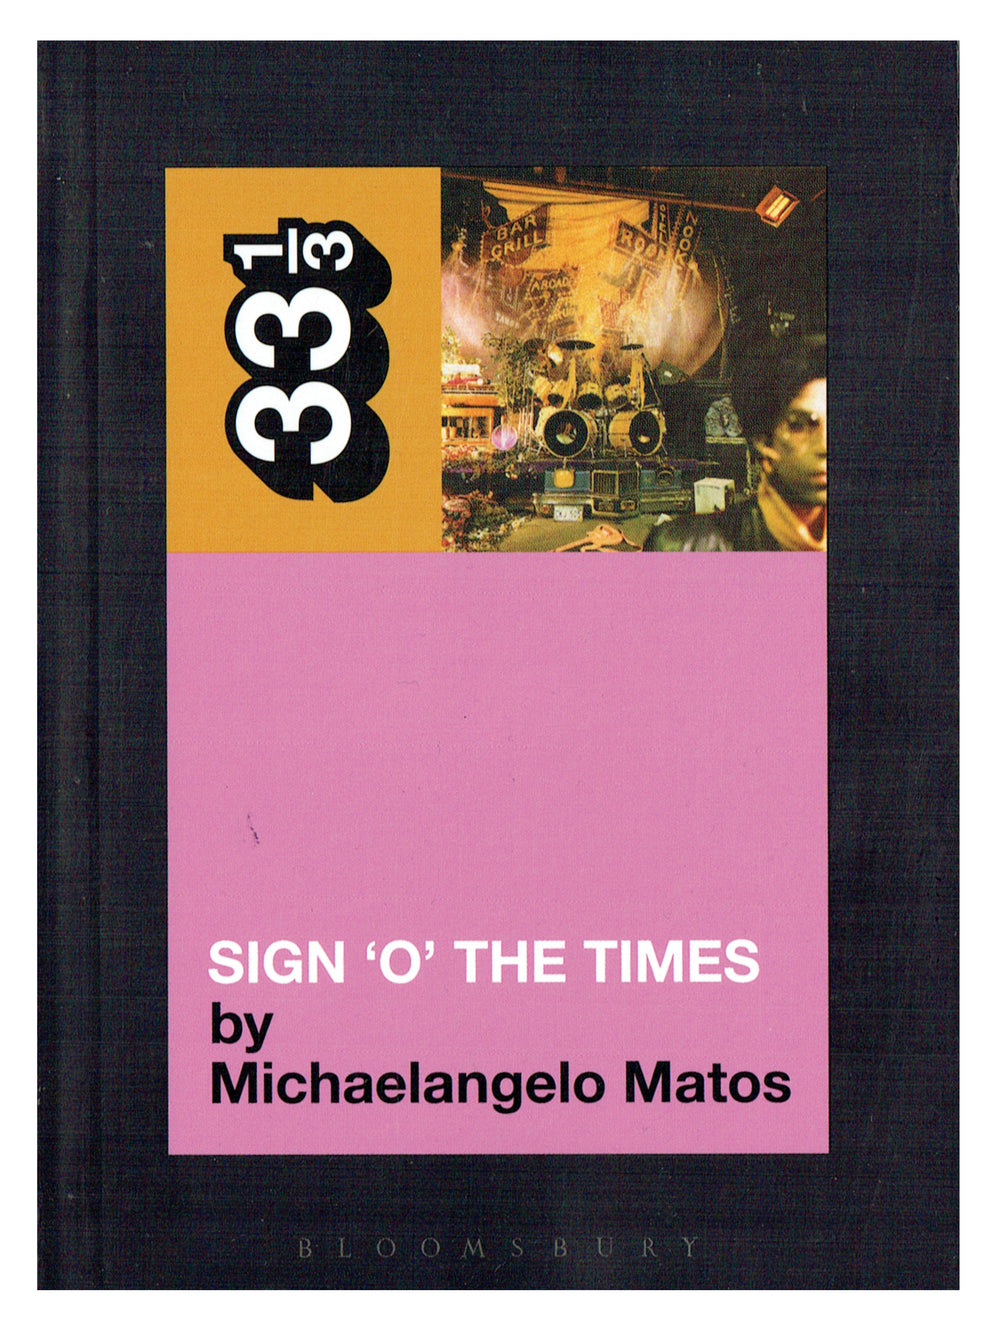 Prince – Sign O'the Times by Michaelangelo Matos Paperback / Softback Book: NEW